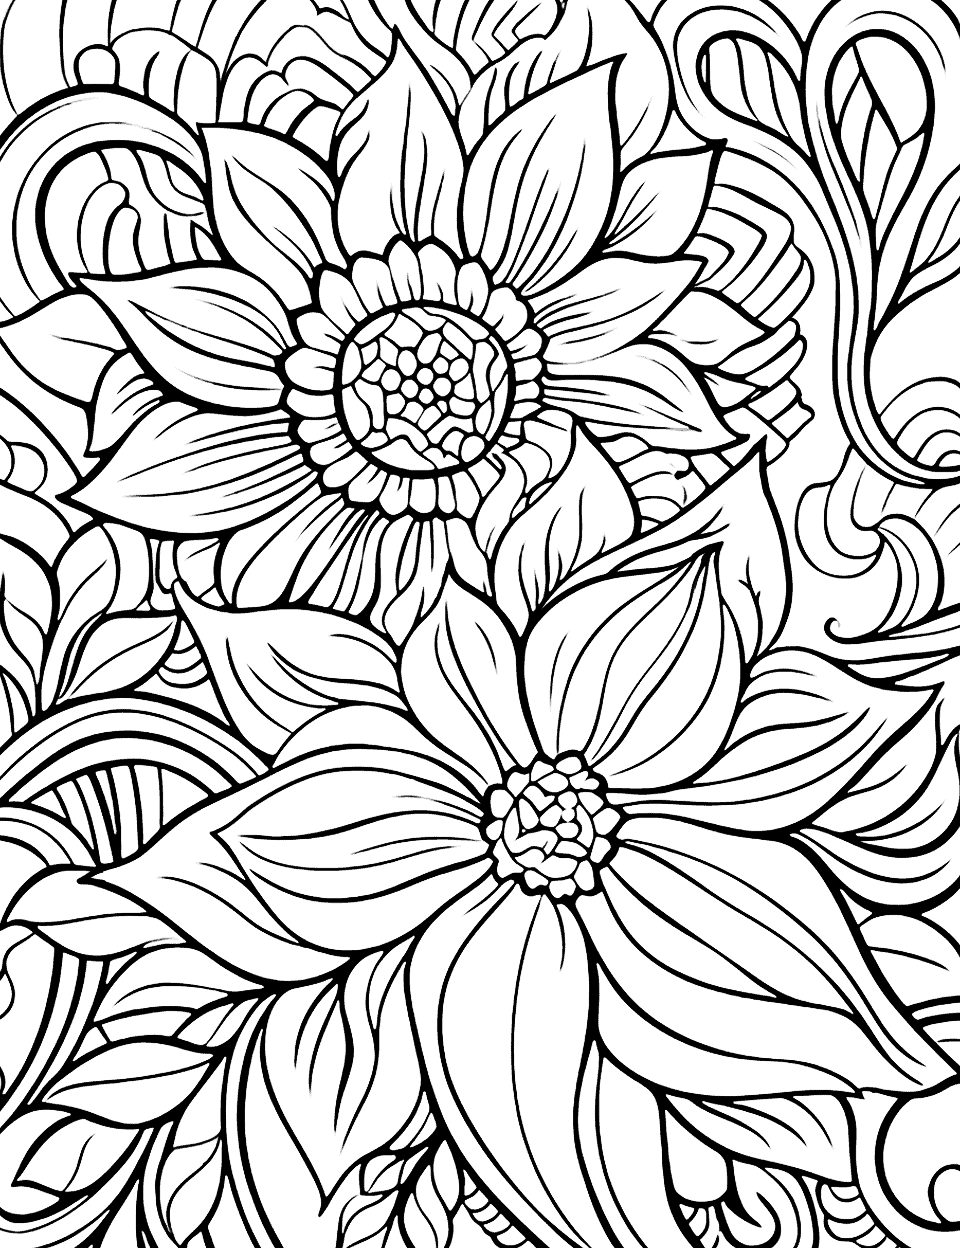 Abstract Floral Design Adult Coloring Page - A coloring page for adults filled with abstract floral designs featuring a variety of flowers, leaves, and intricate details.